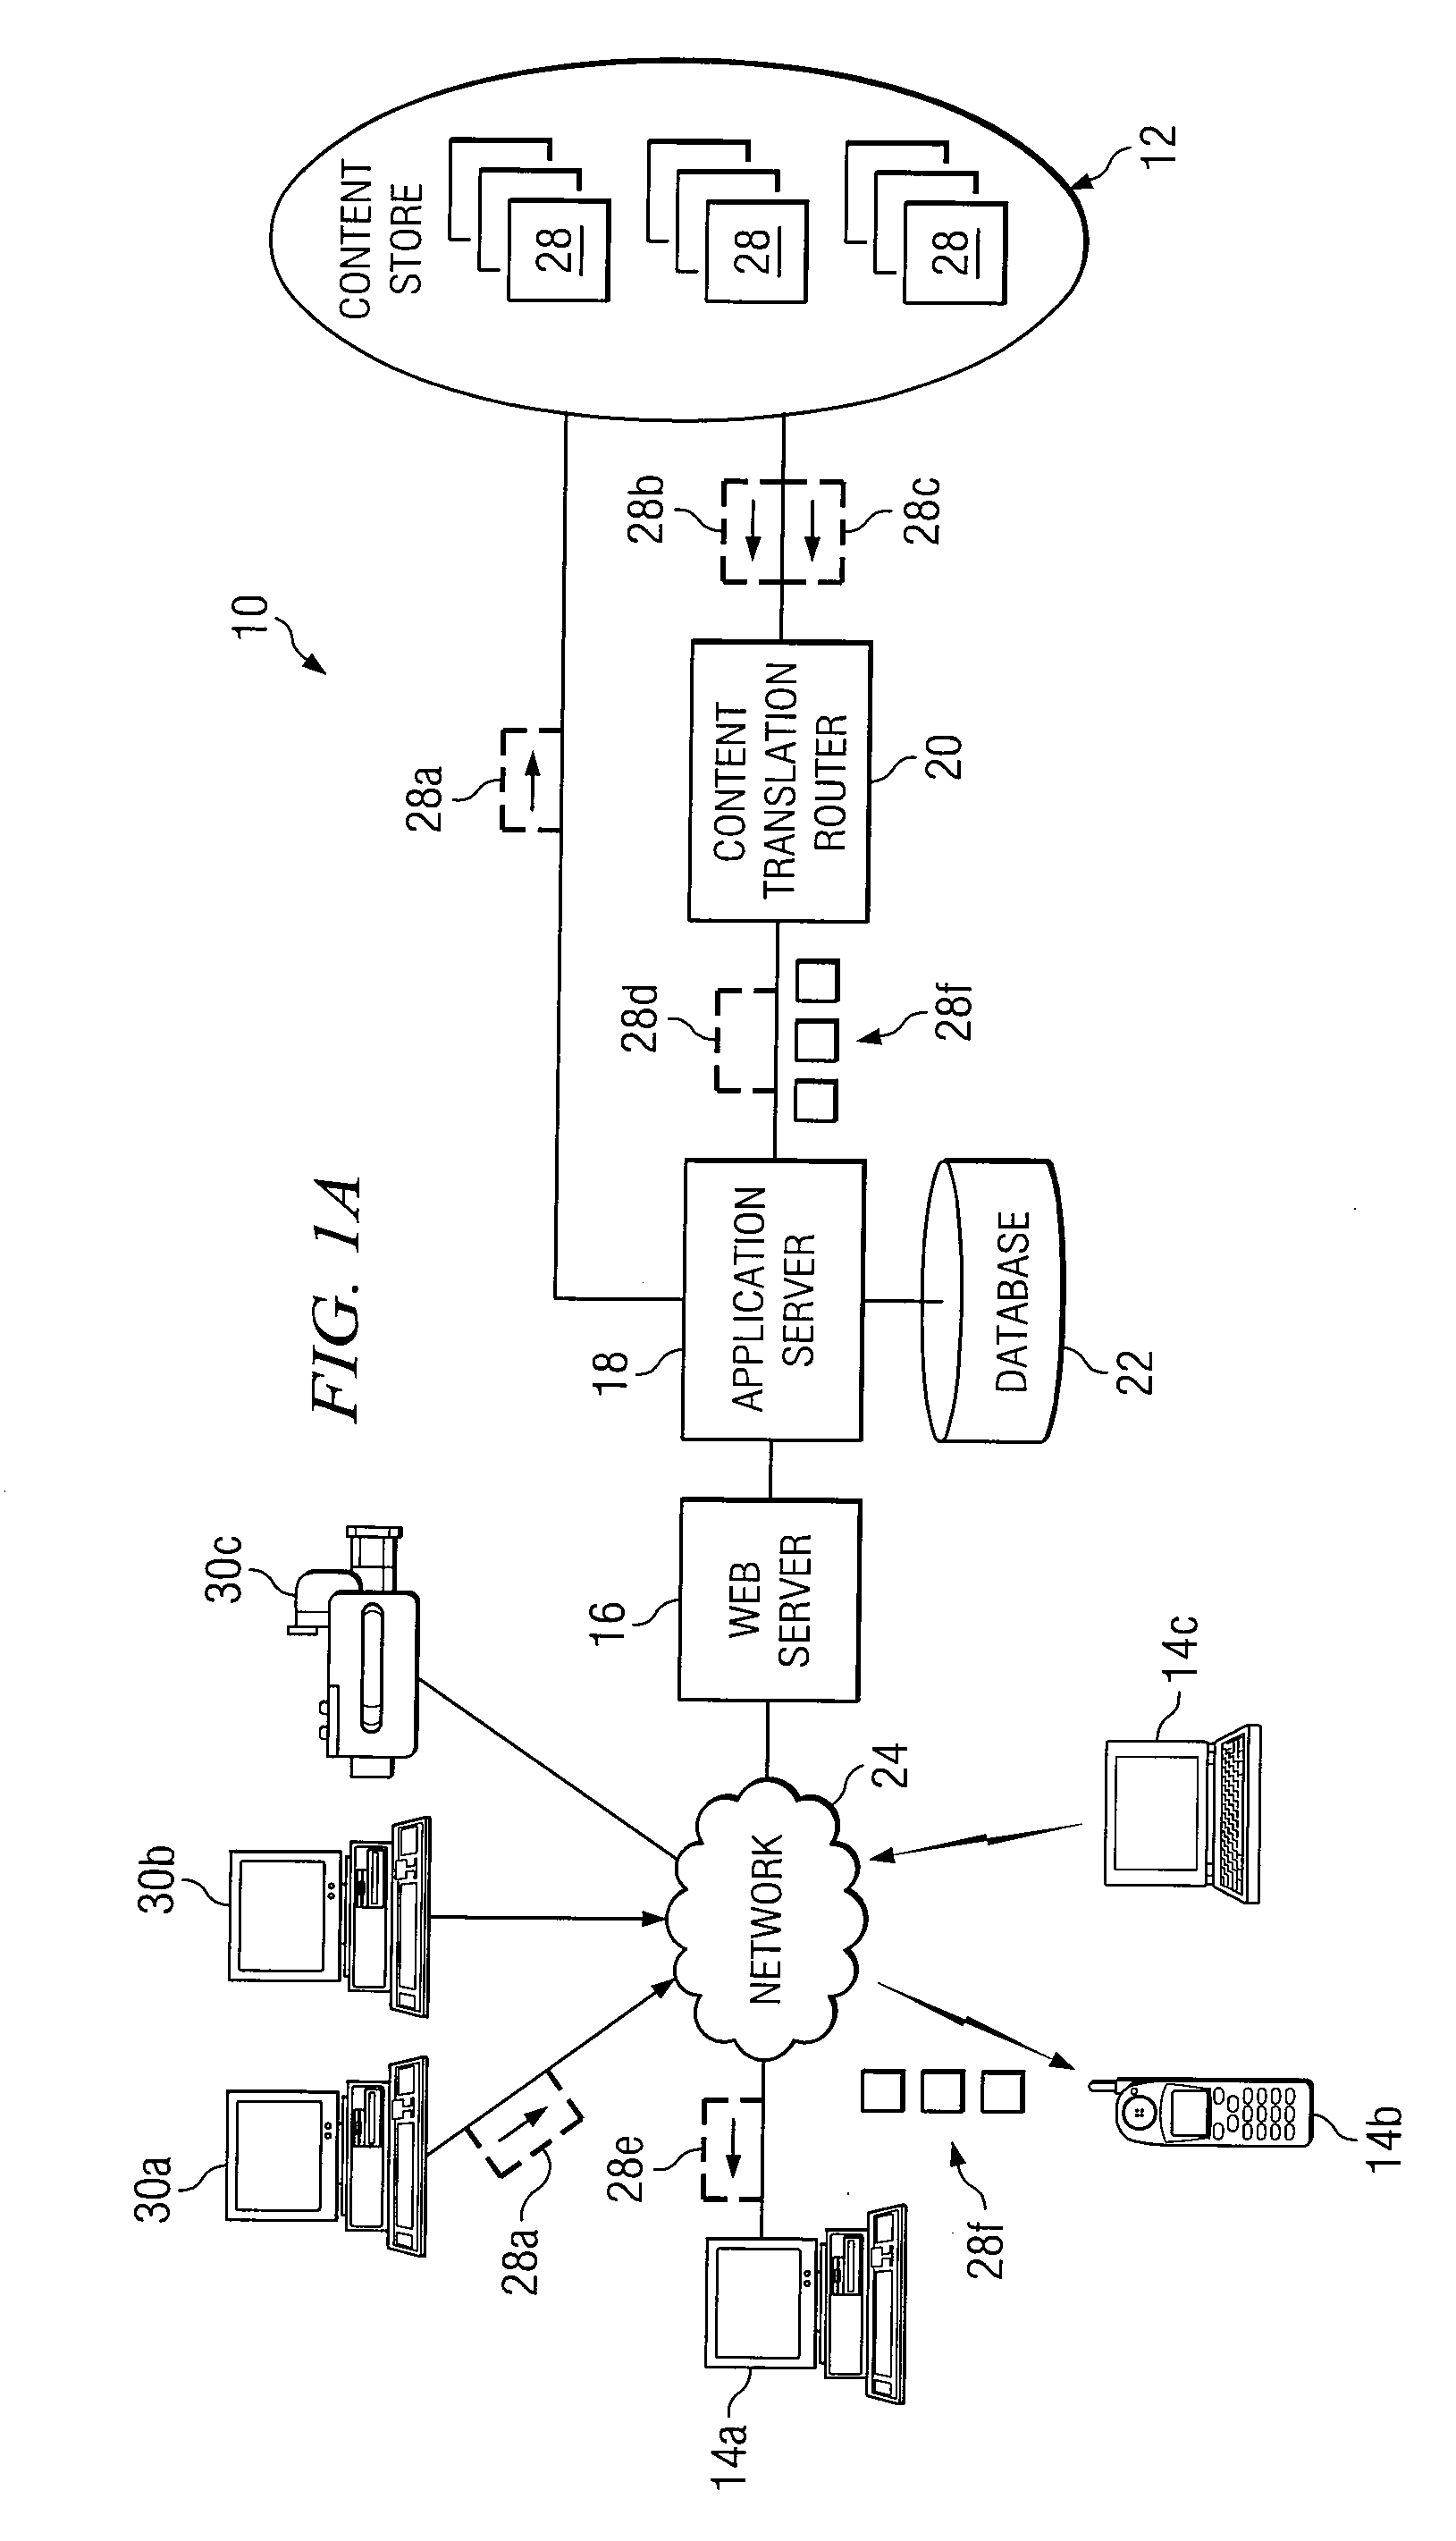 System and method for processing content